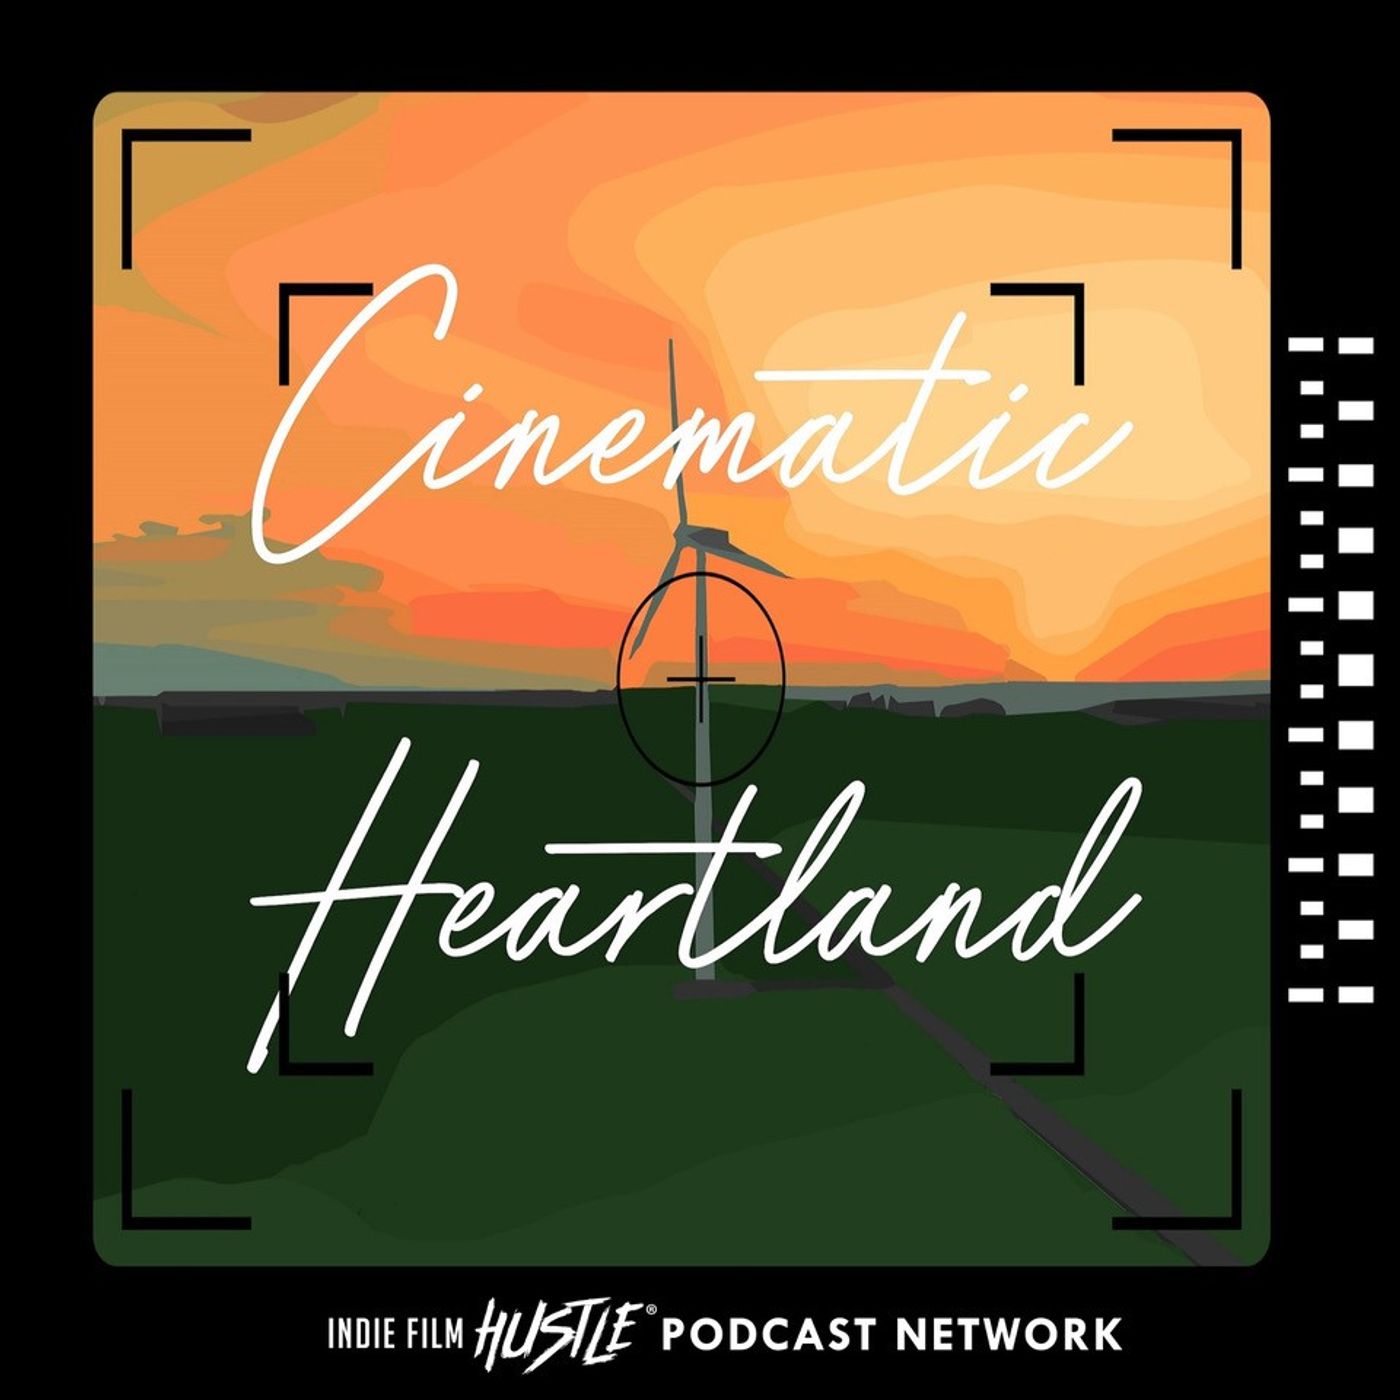 Ep 1: Introduction to Cinematic Heartland